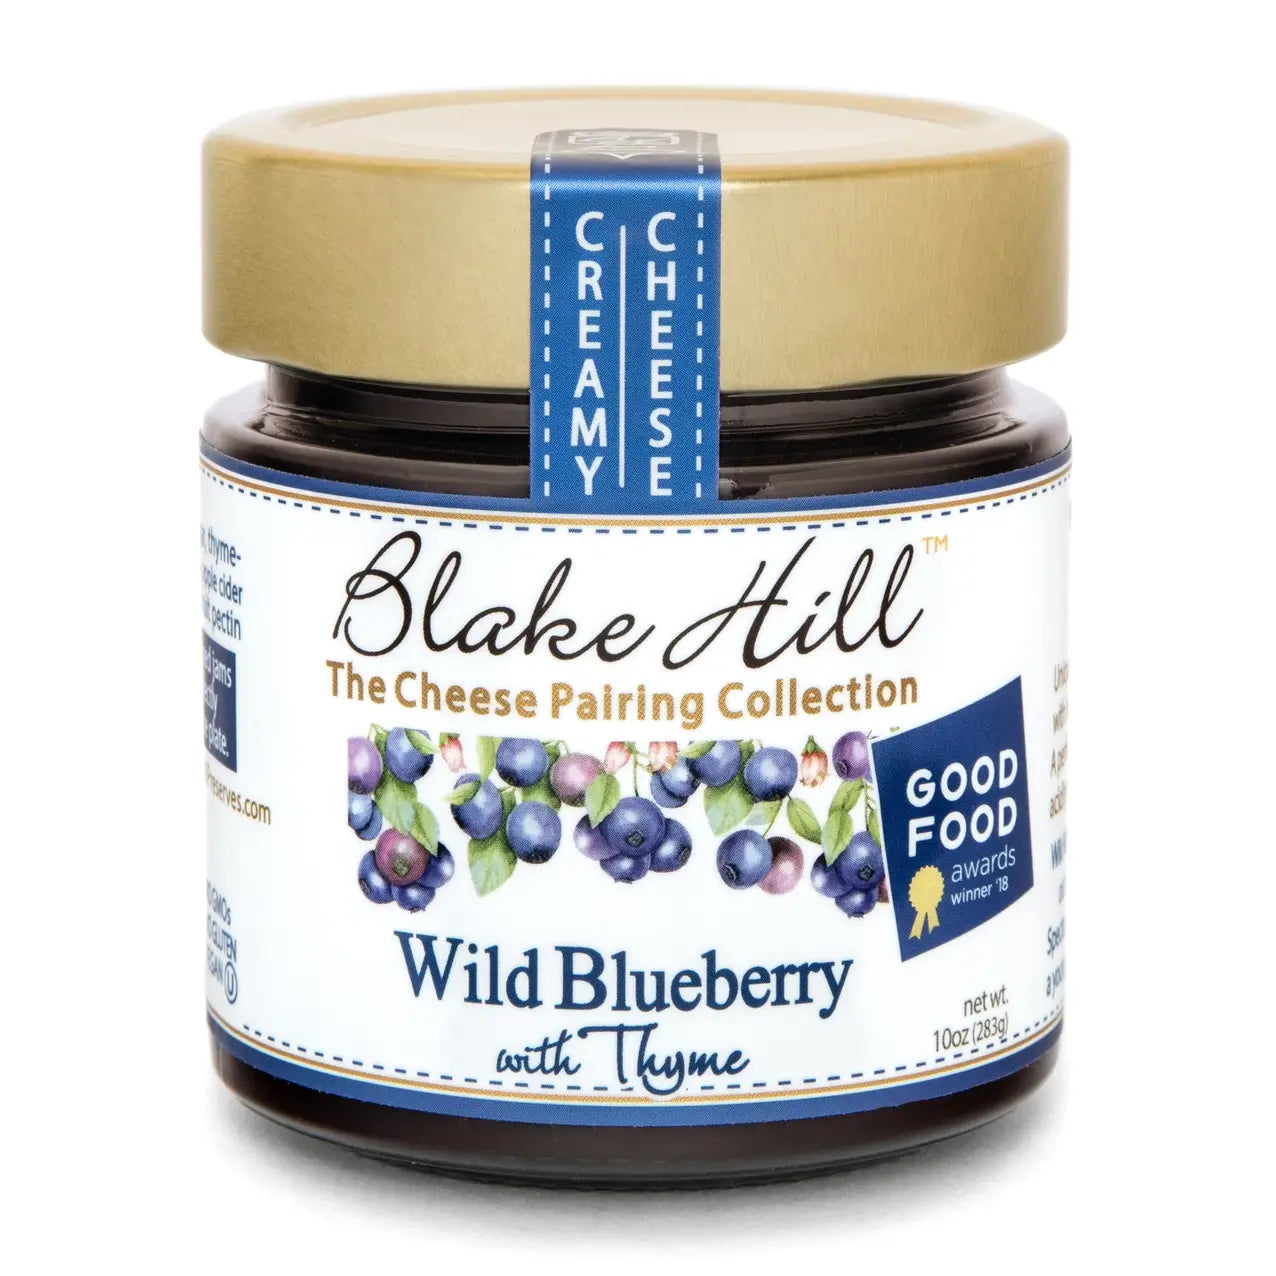 Wild Blueberry with Thyme Jam